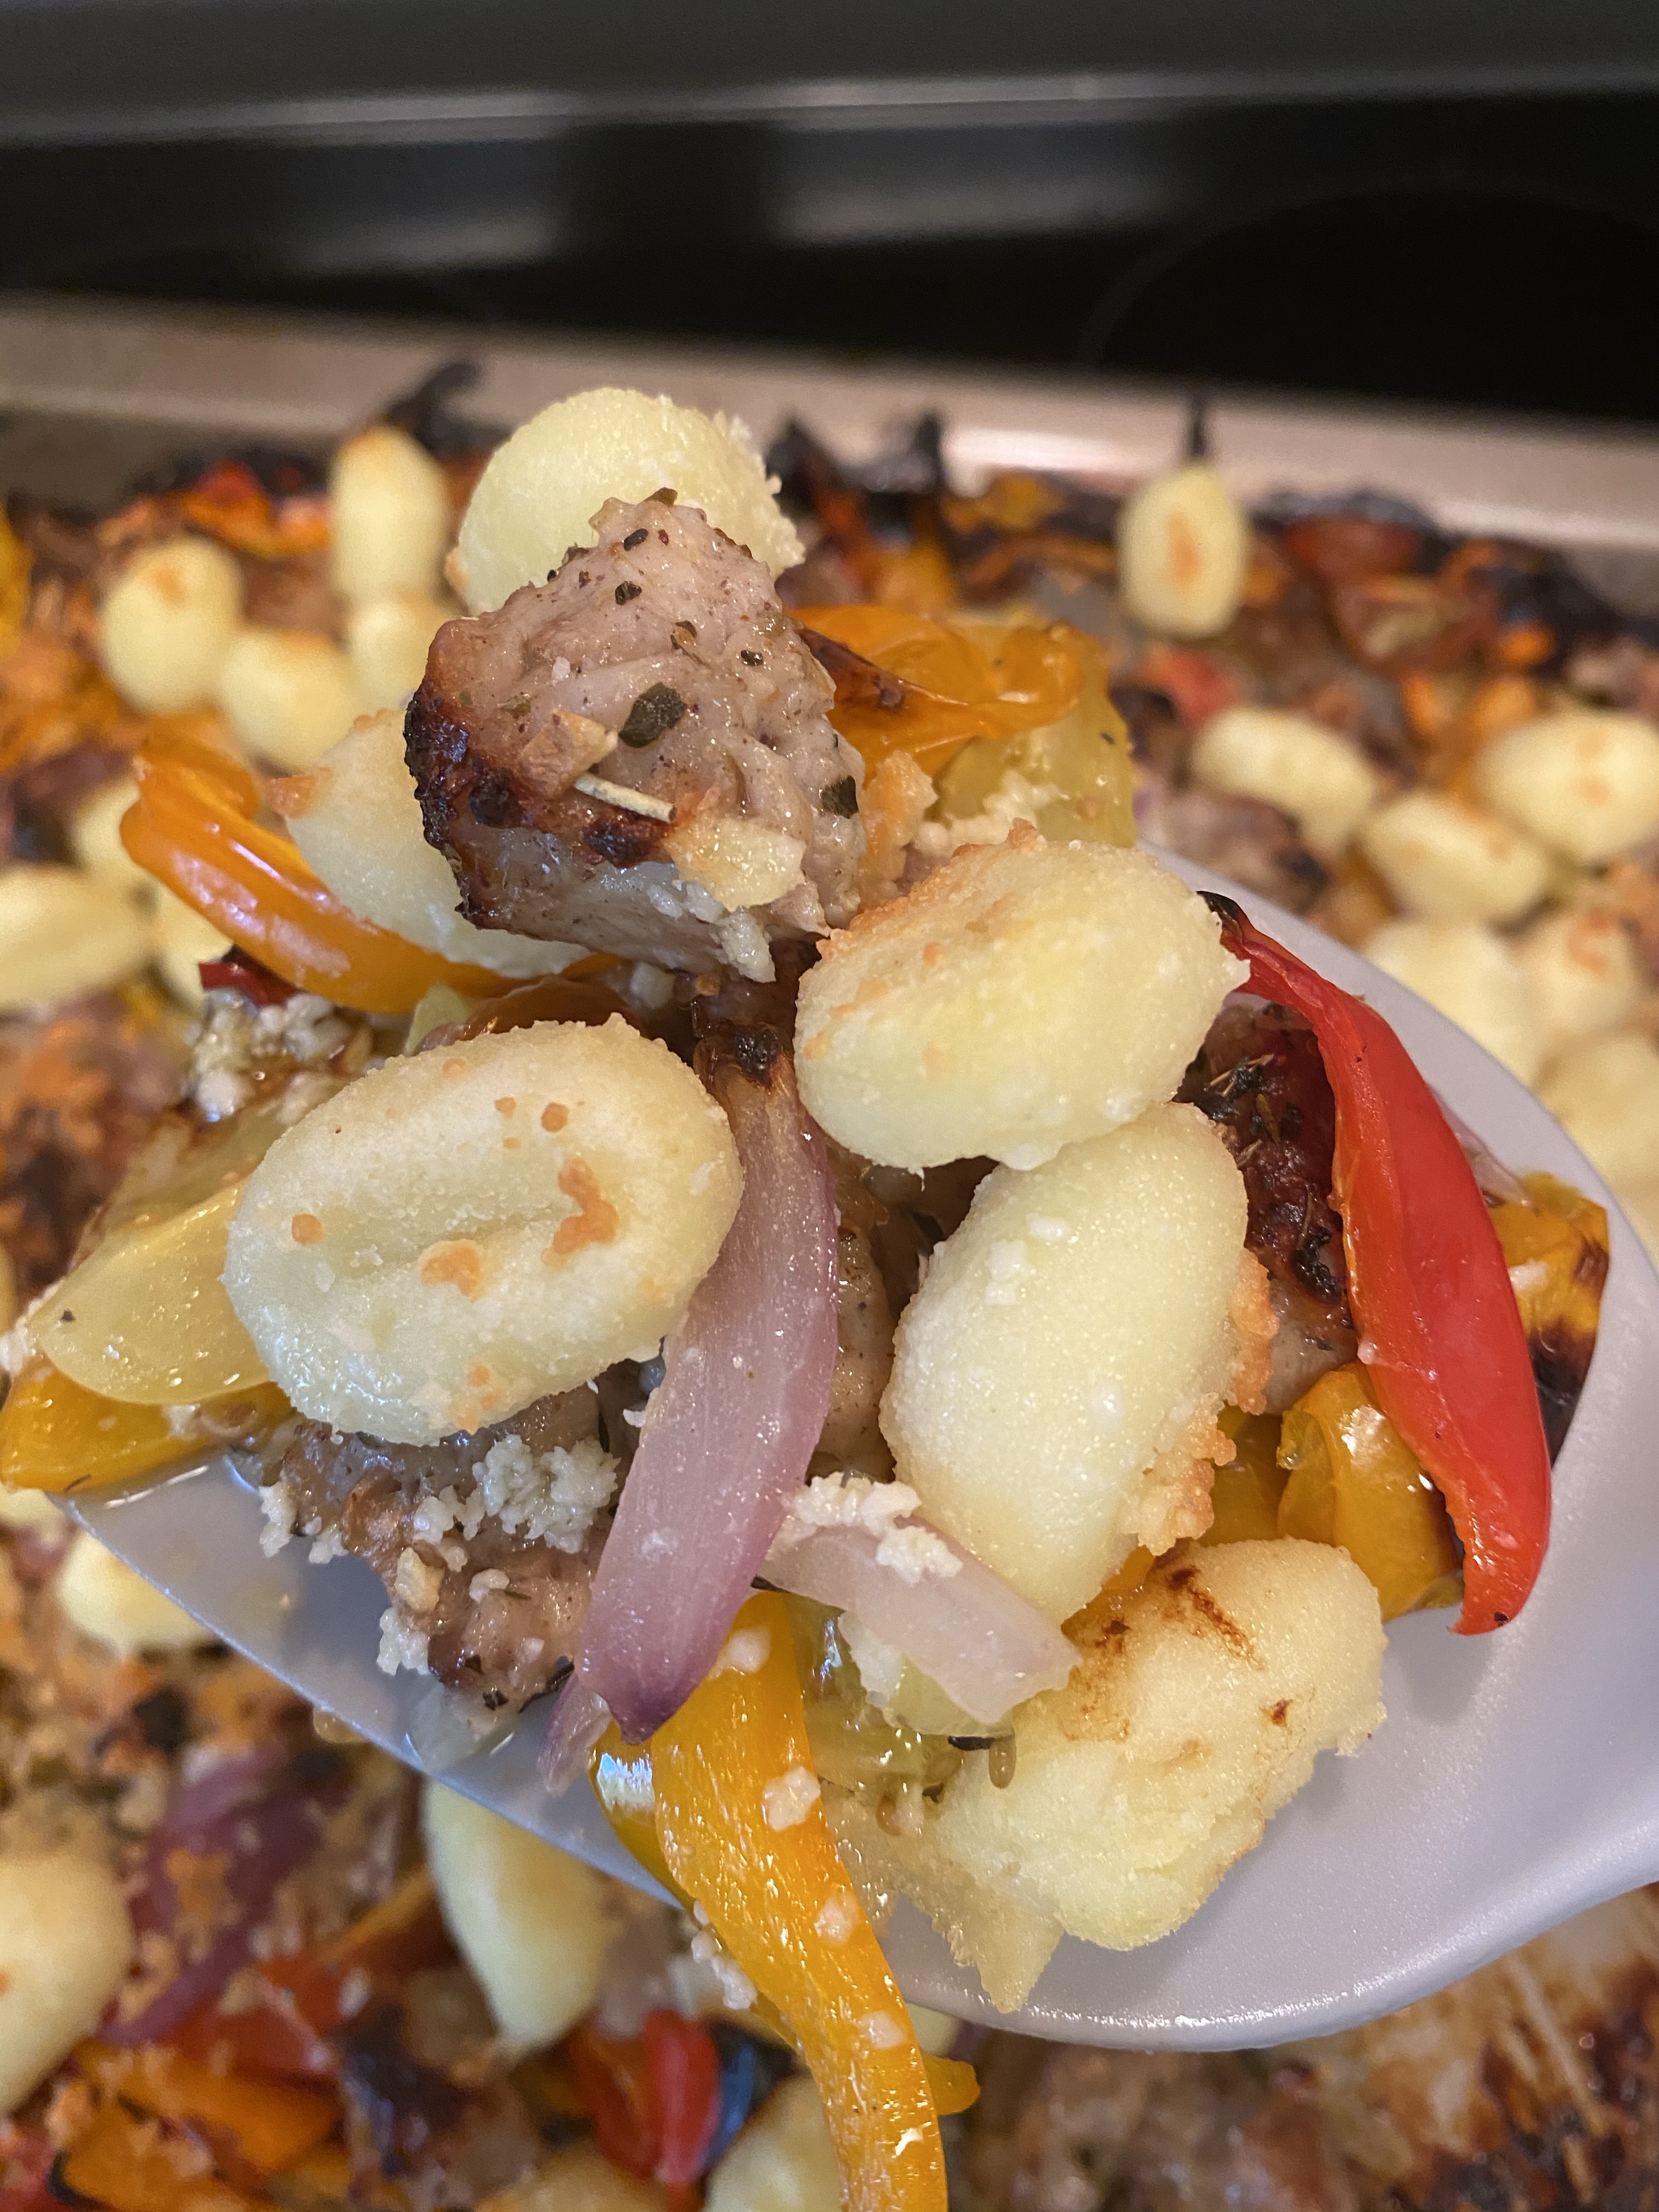 Oven Roasted Gnocchi With Sausage & Peppers